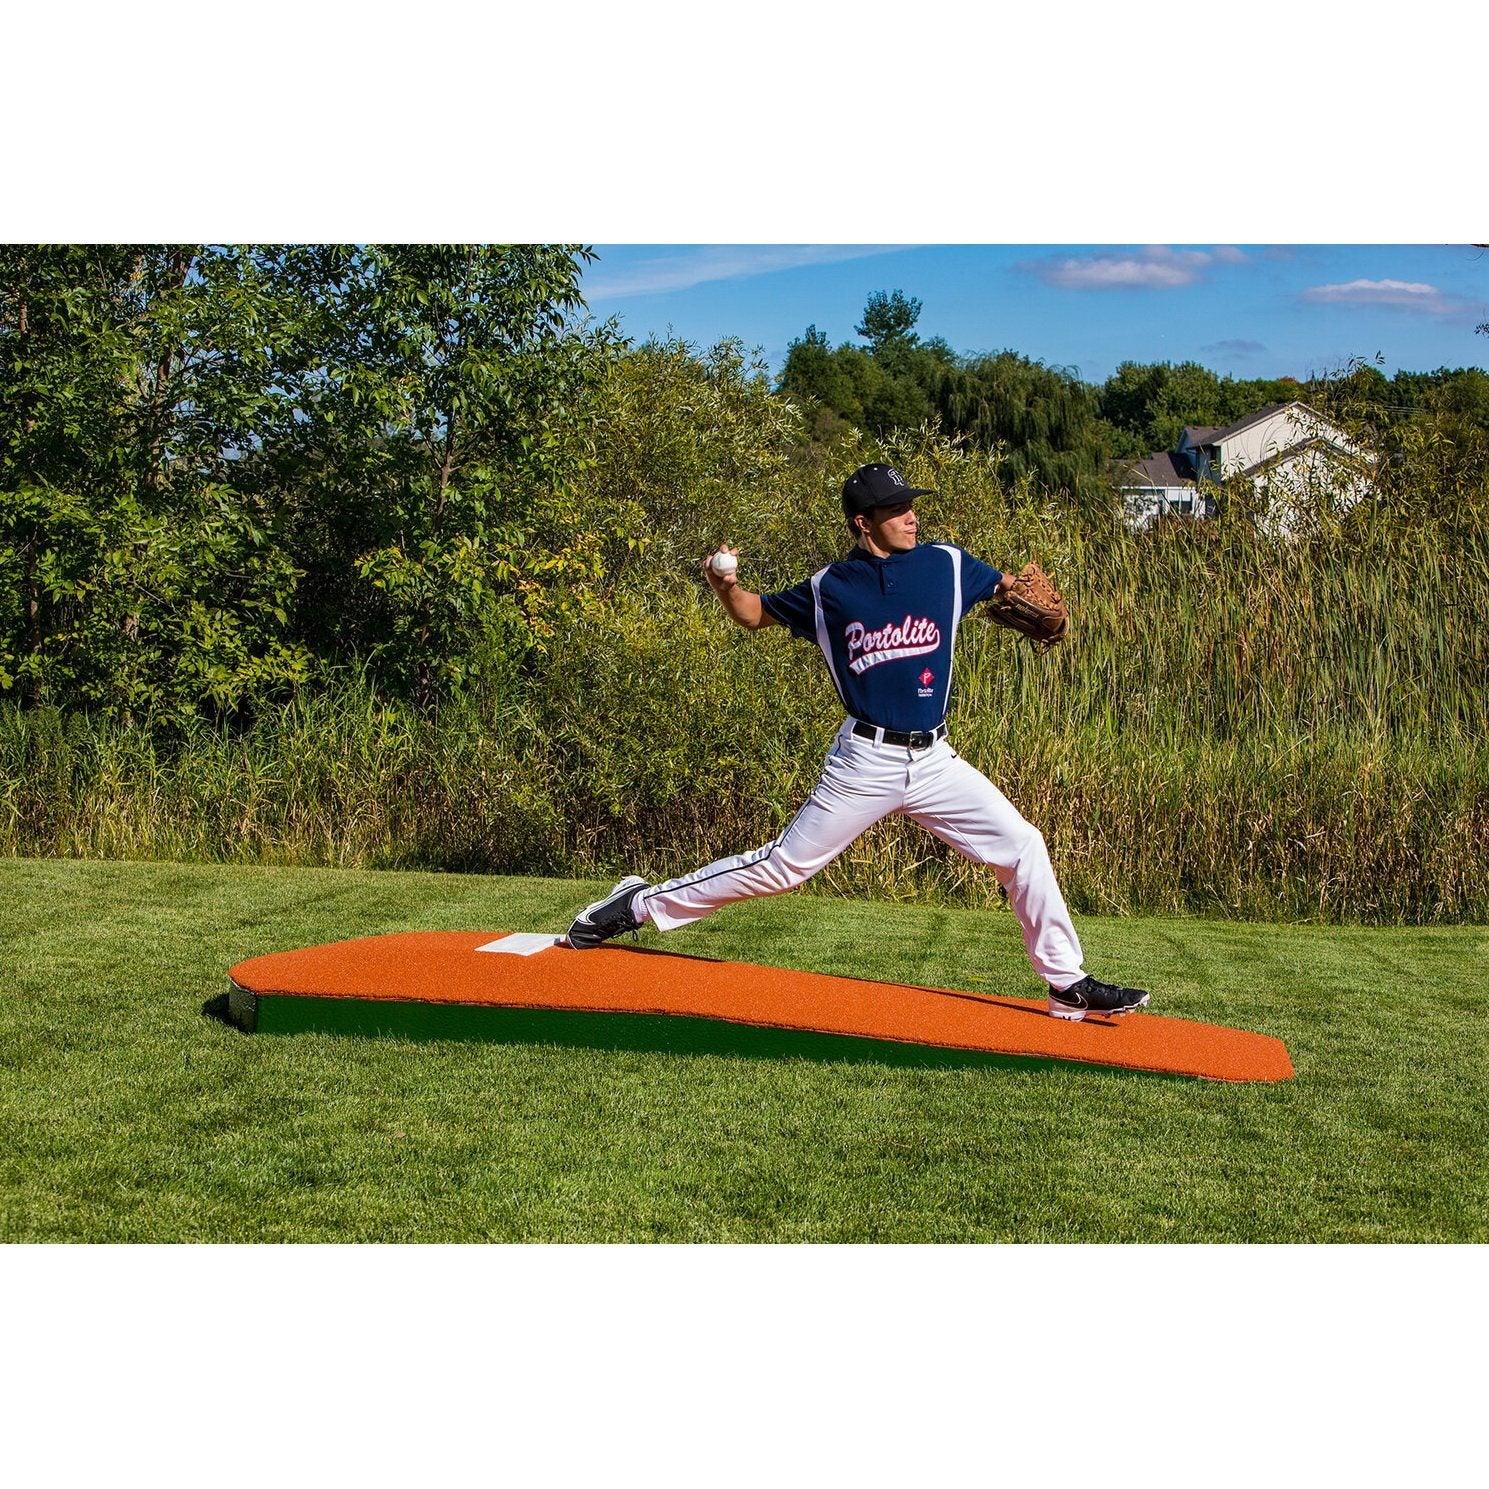 Portolite 10" Full Size Portable Practice Pitching Mound clay side view player pitching